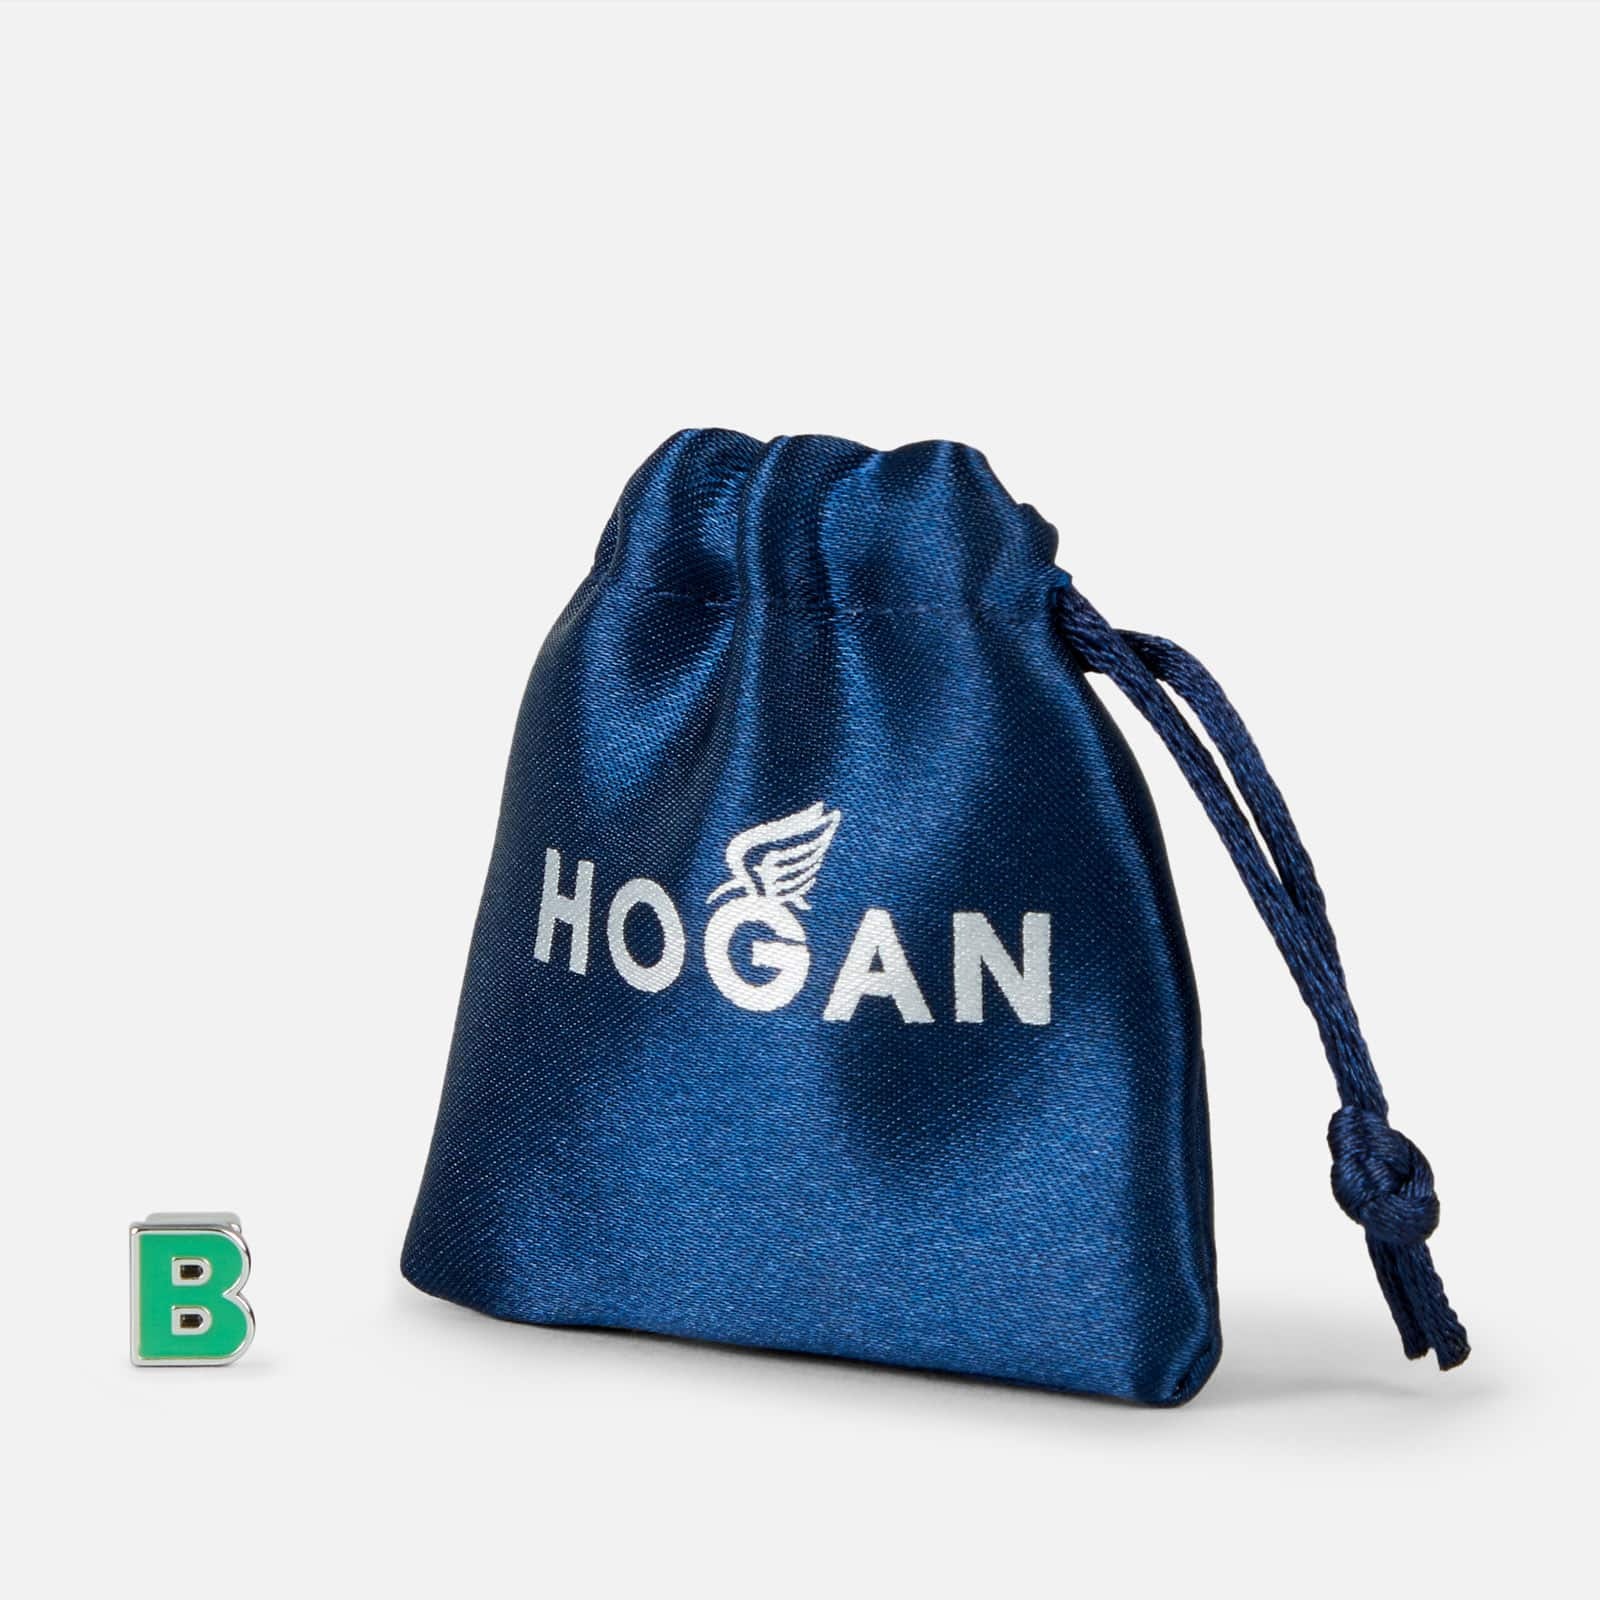 Hogan By You - Shoelace Bead Green Gold Red - 2